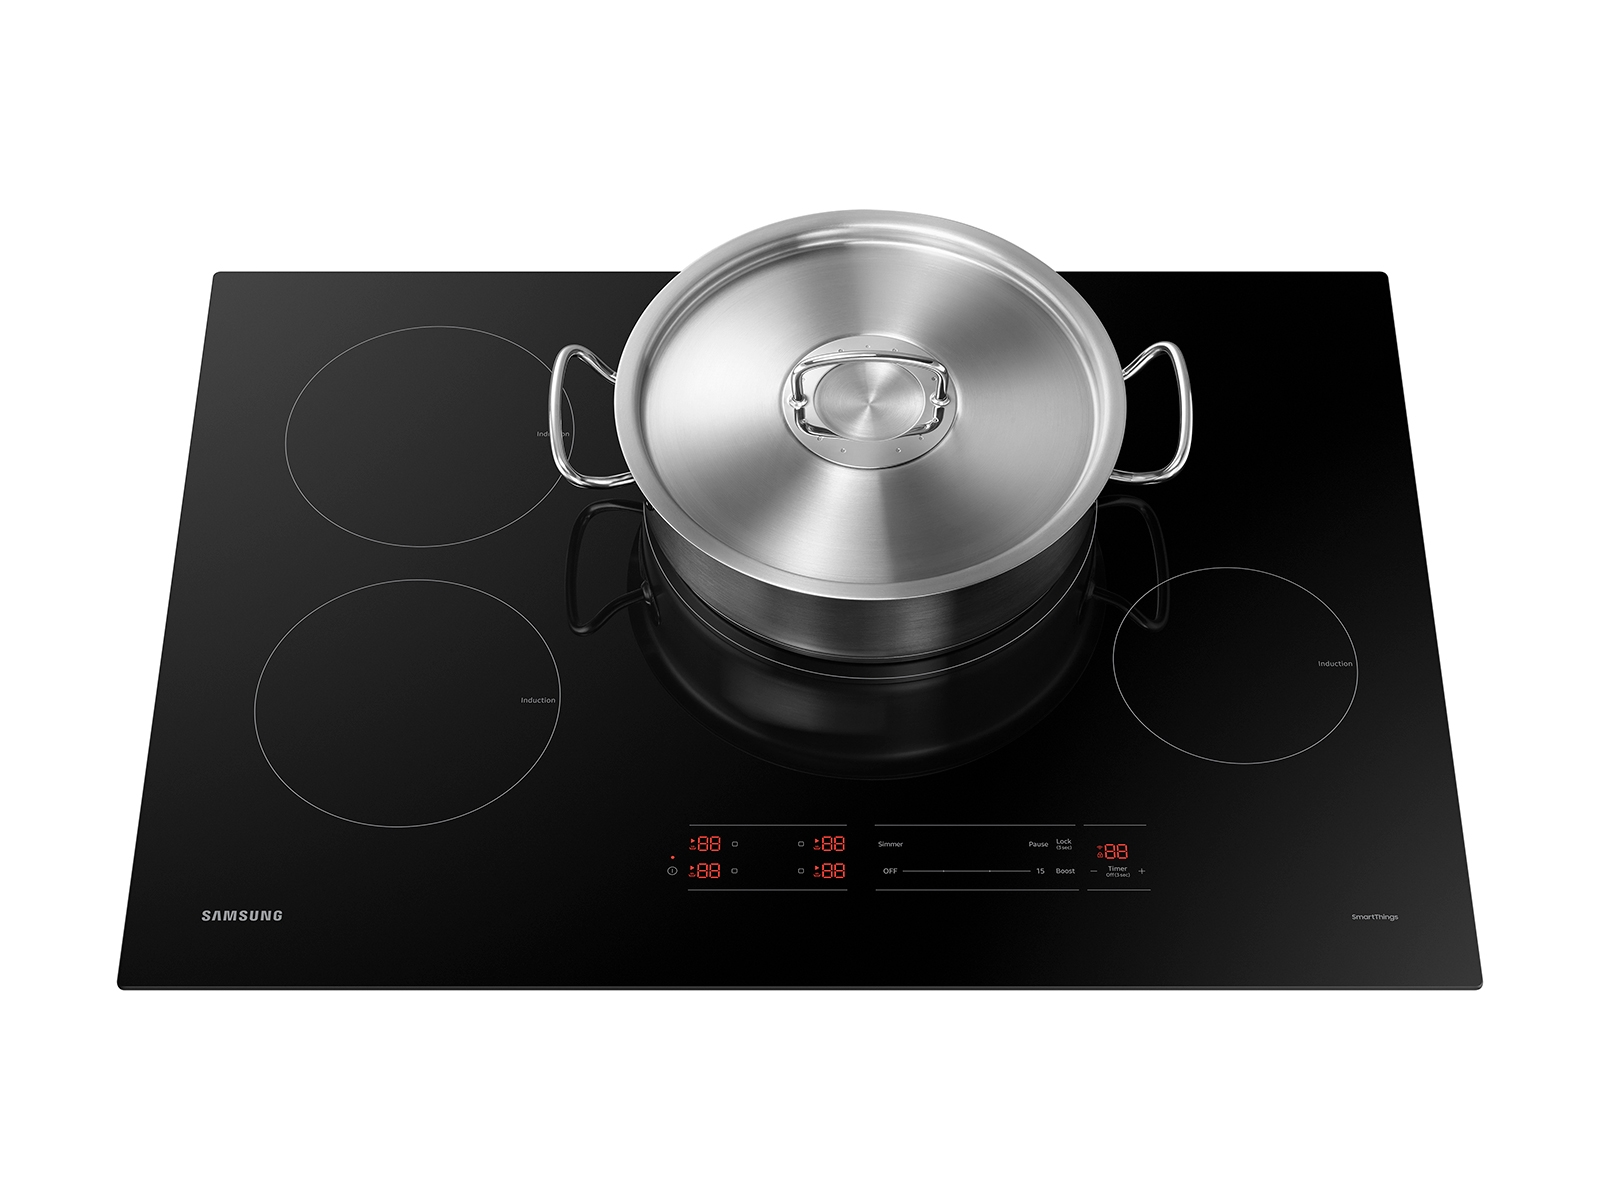 With a portable induction cooktop, the world is your kitchen. At